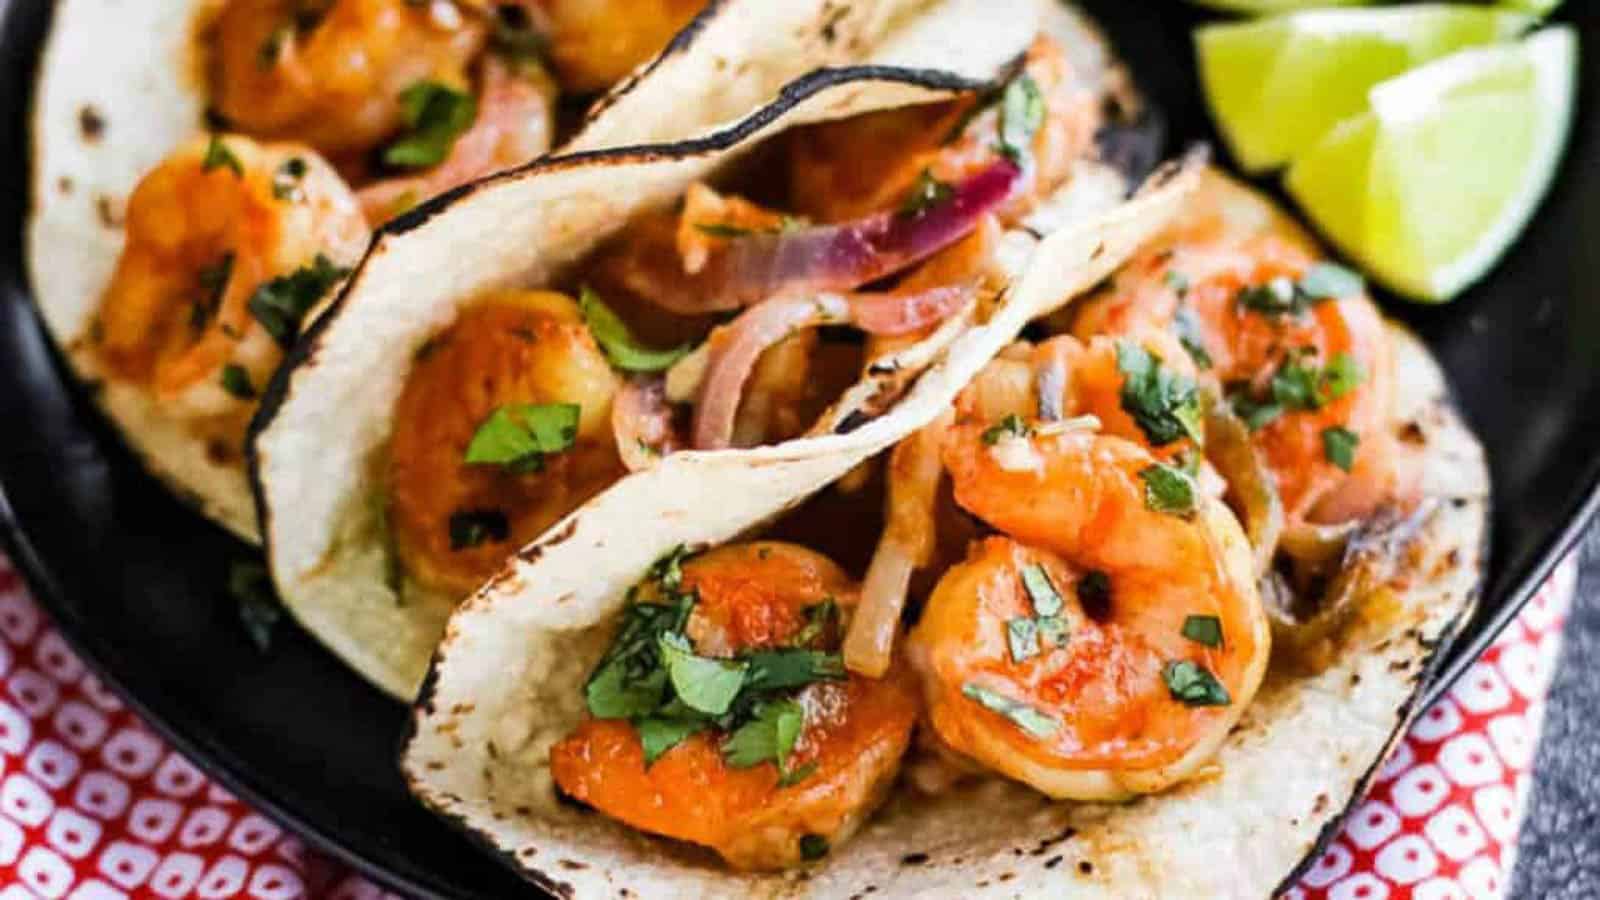 <p>For all the garlic lovers out there, Camarones al Mojo de Ajo is the dish of your dreams. Saucy, garlicky shrimp take center stage in this meal, and you’ll be itching to get these flavors back on your plate next week.<br><strong>Get the Recipe: </strong><a href="https://allwaysdelicious.com/camarones-al-mojo-de-ajo/?utm_source=msn&utm_medium=page&utm_campaign=msn">Camarones al Mojo de Ajo</a></p>